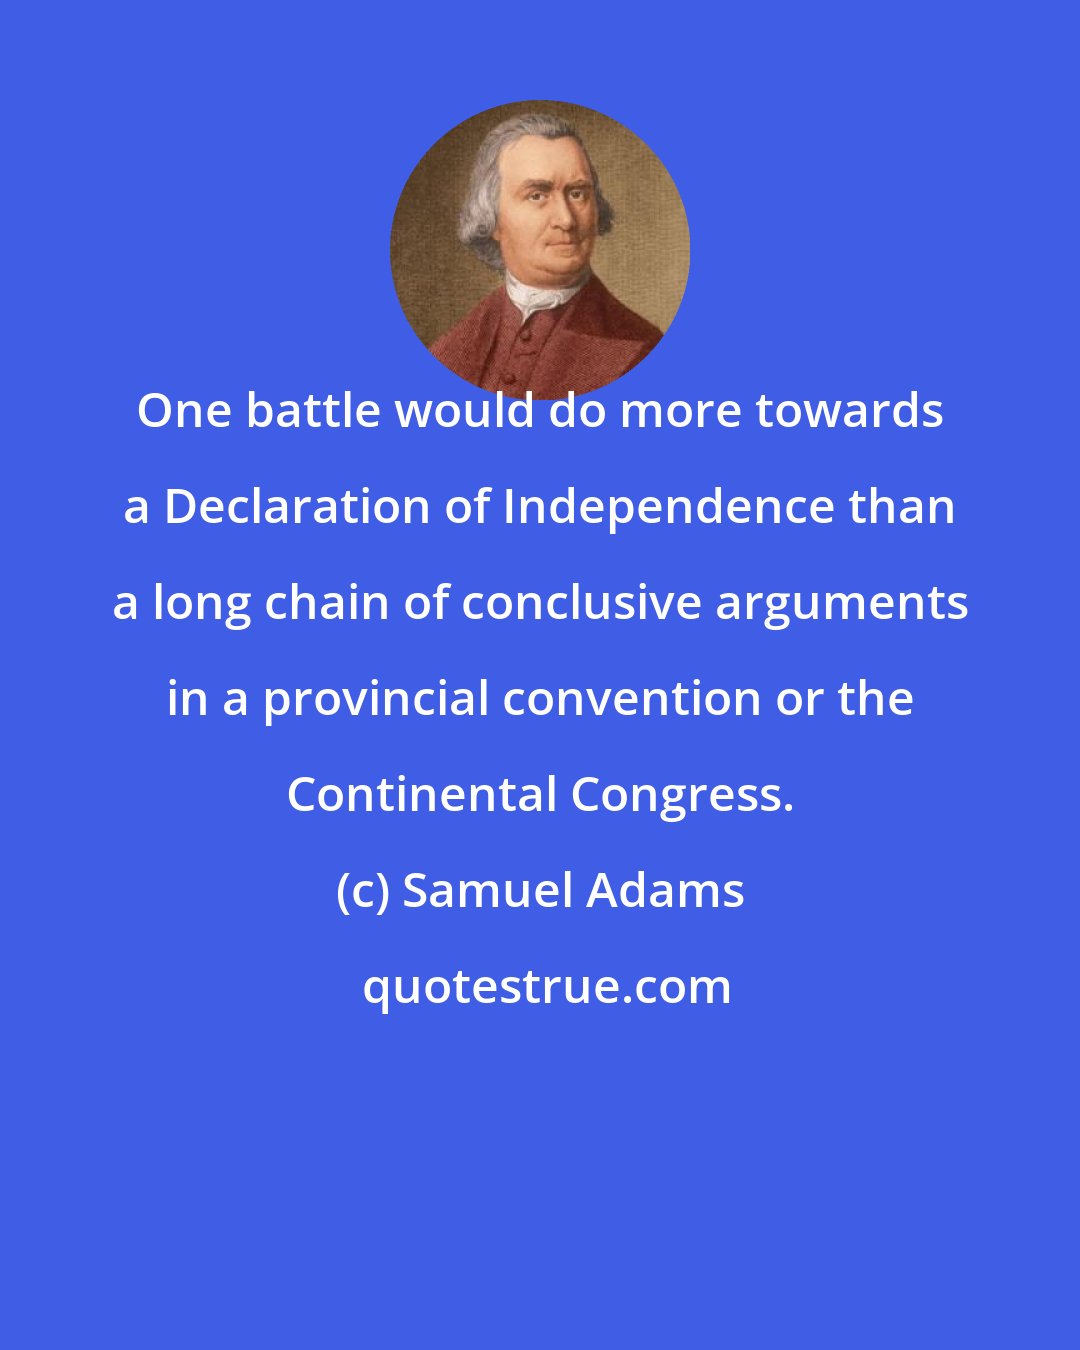 Samuel Adams: One battle would do more towards a Declaration of Independence than a long chain of conclusive arguments in a provincial convention or the Continental Congress.